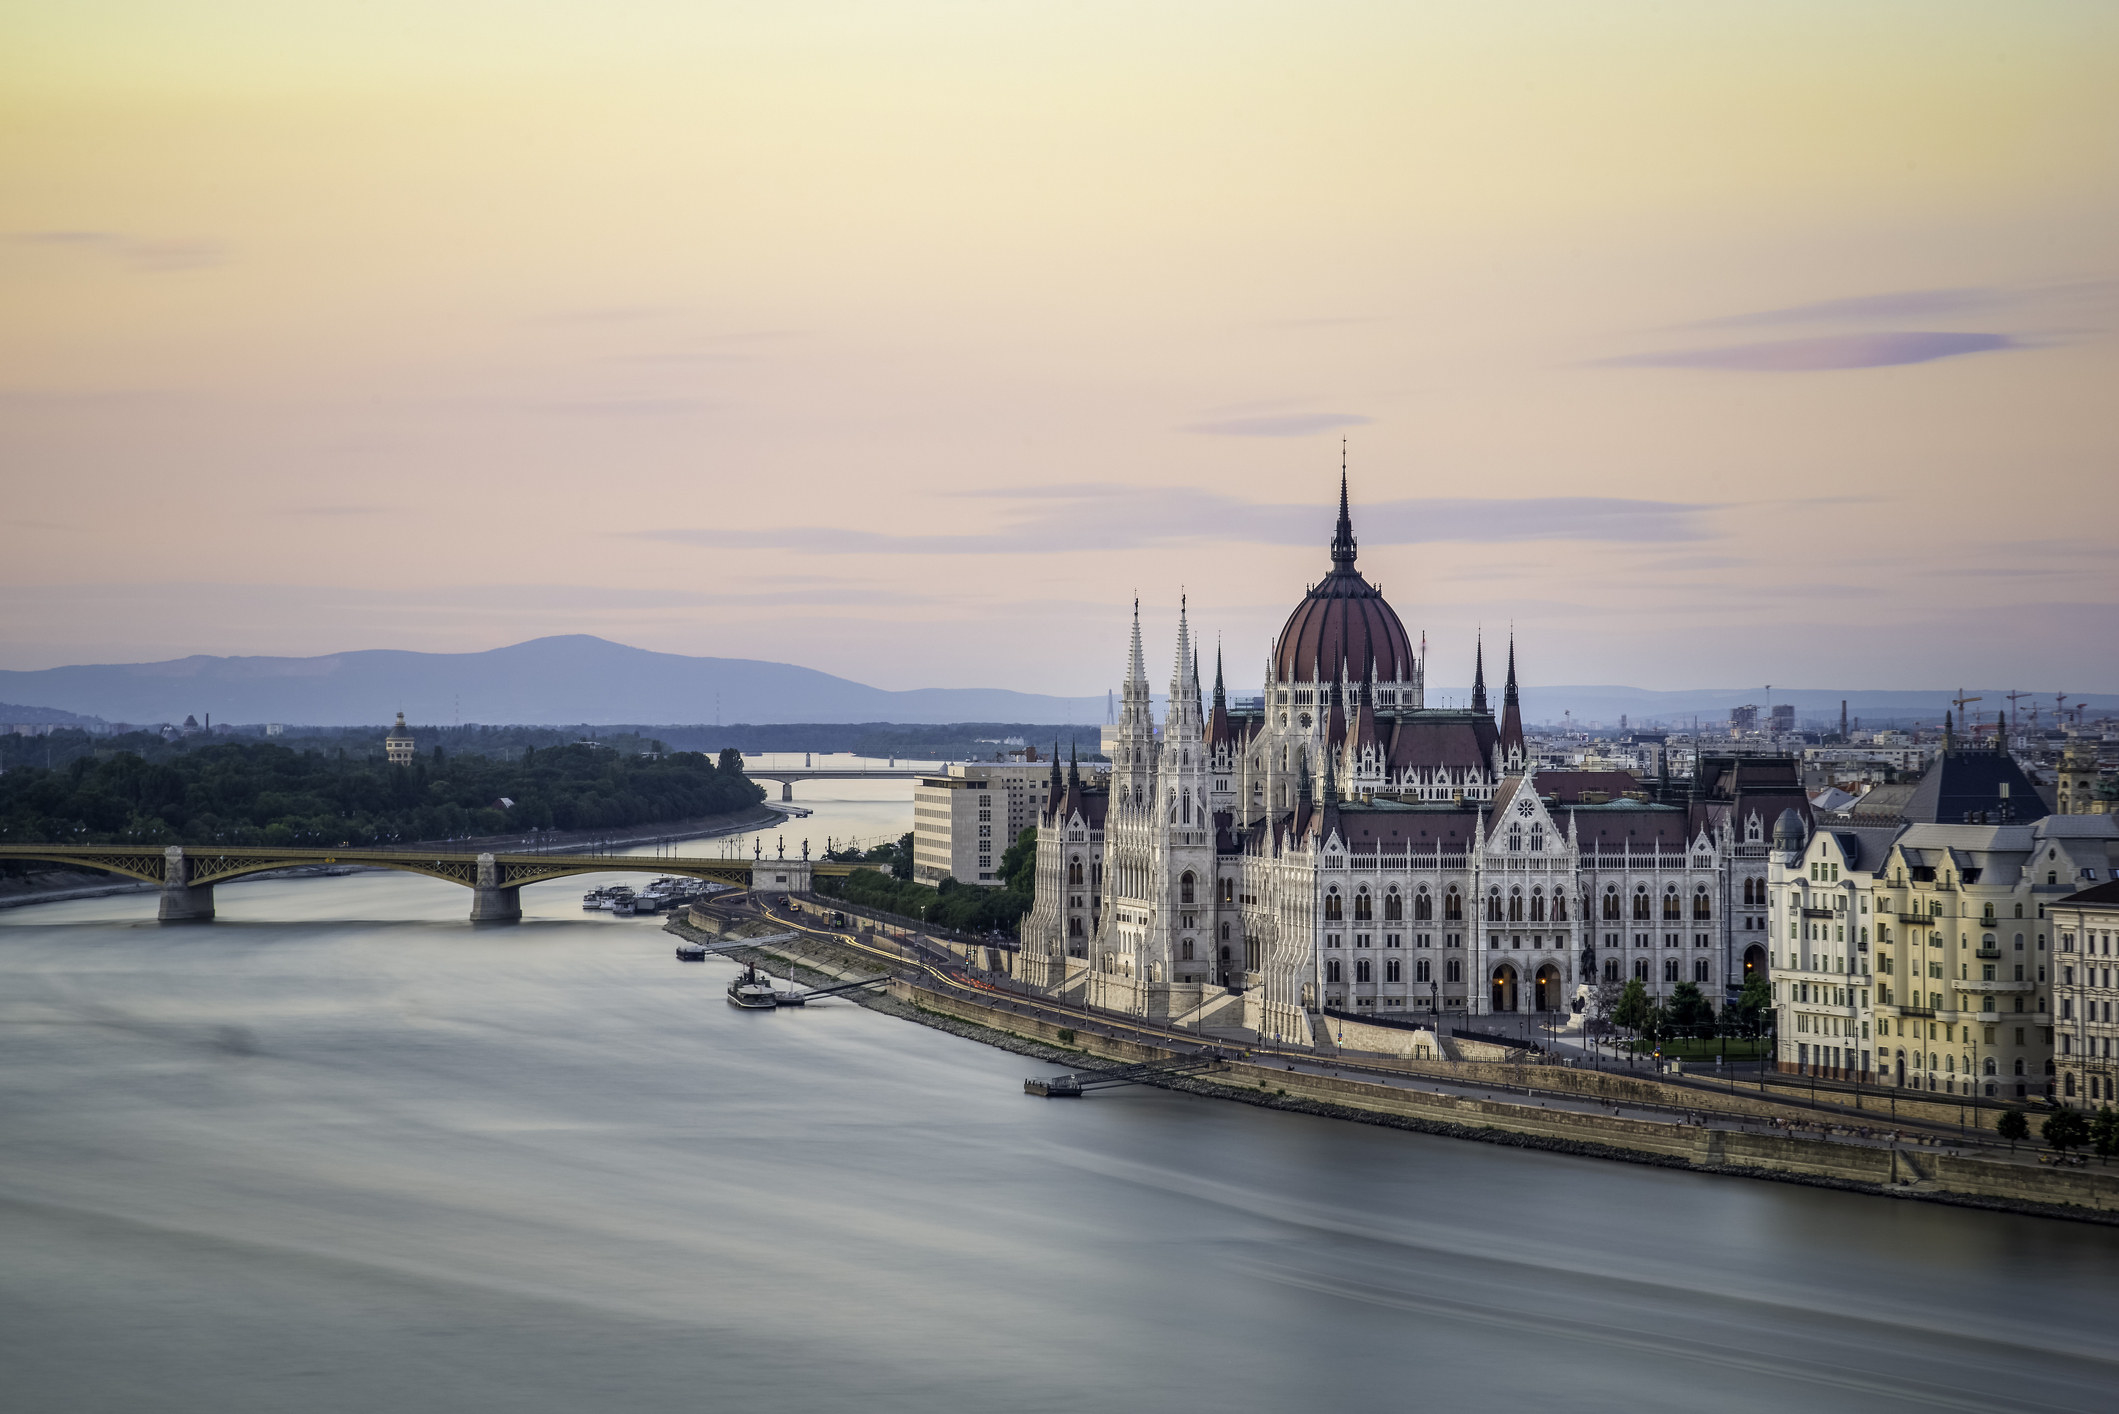 The Hungarian Parliament Building on the banks of the Danube at dawn.